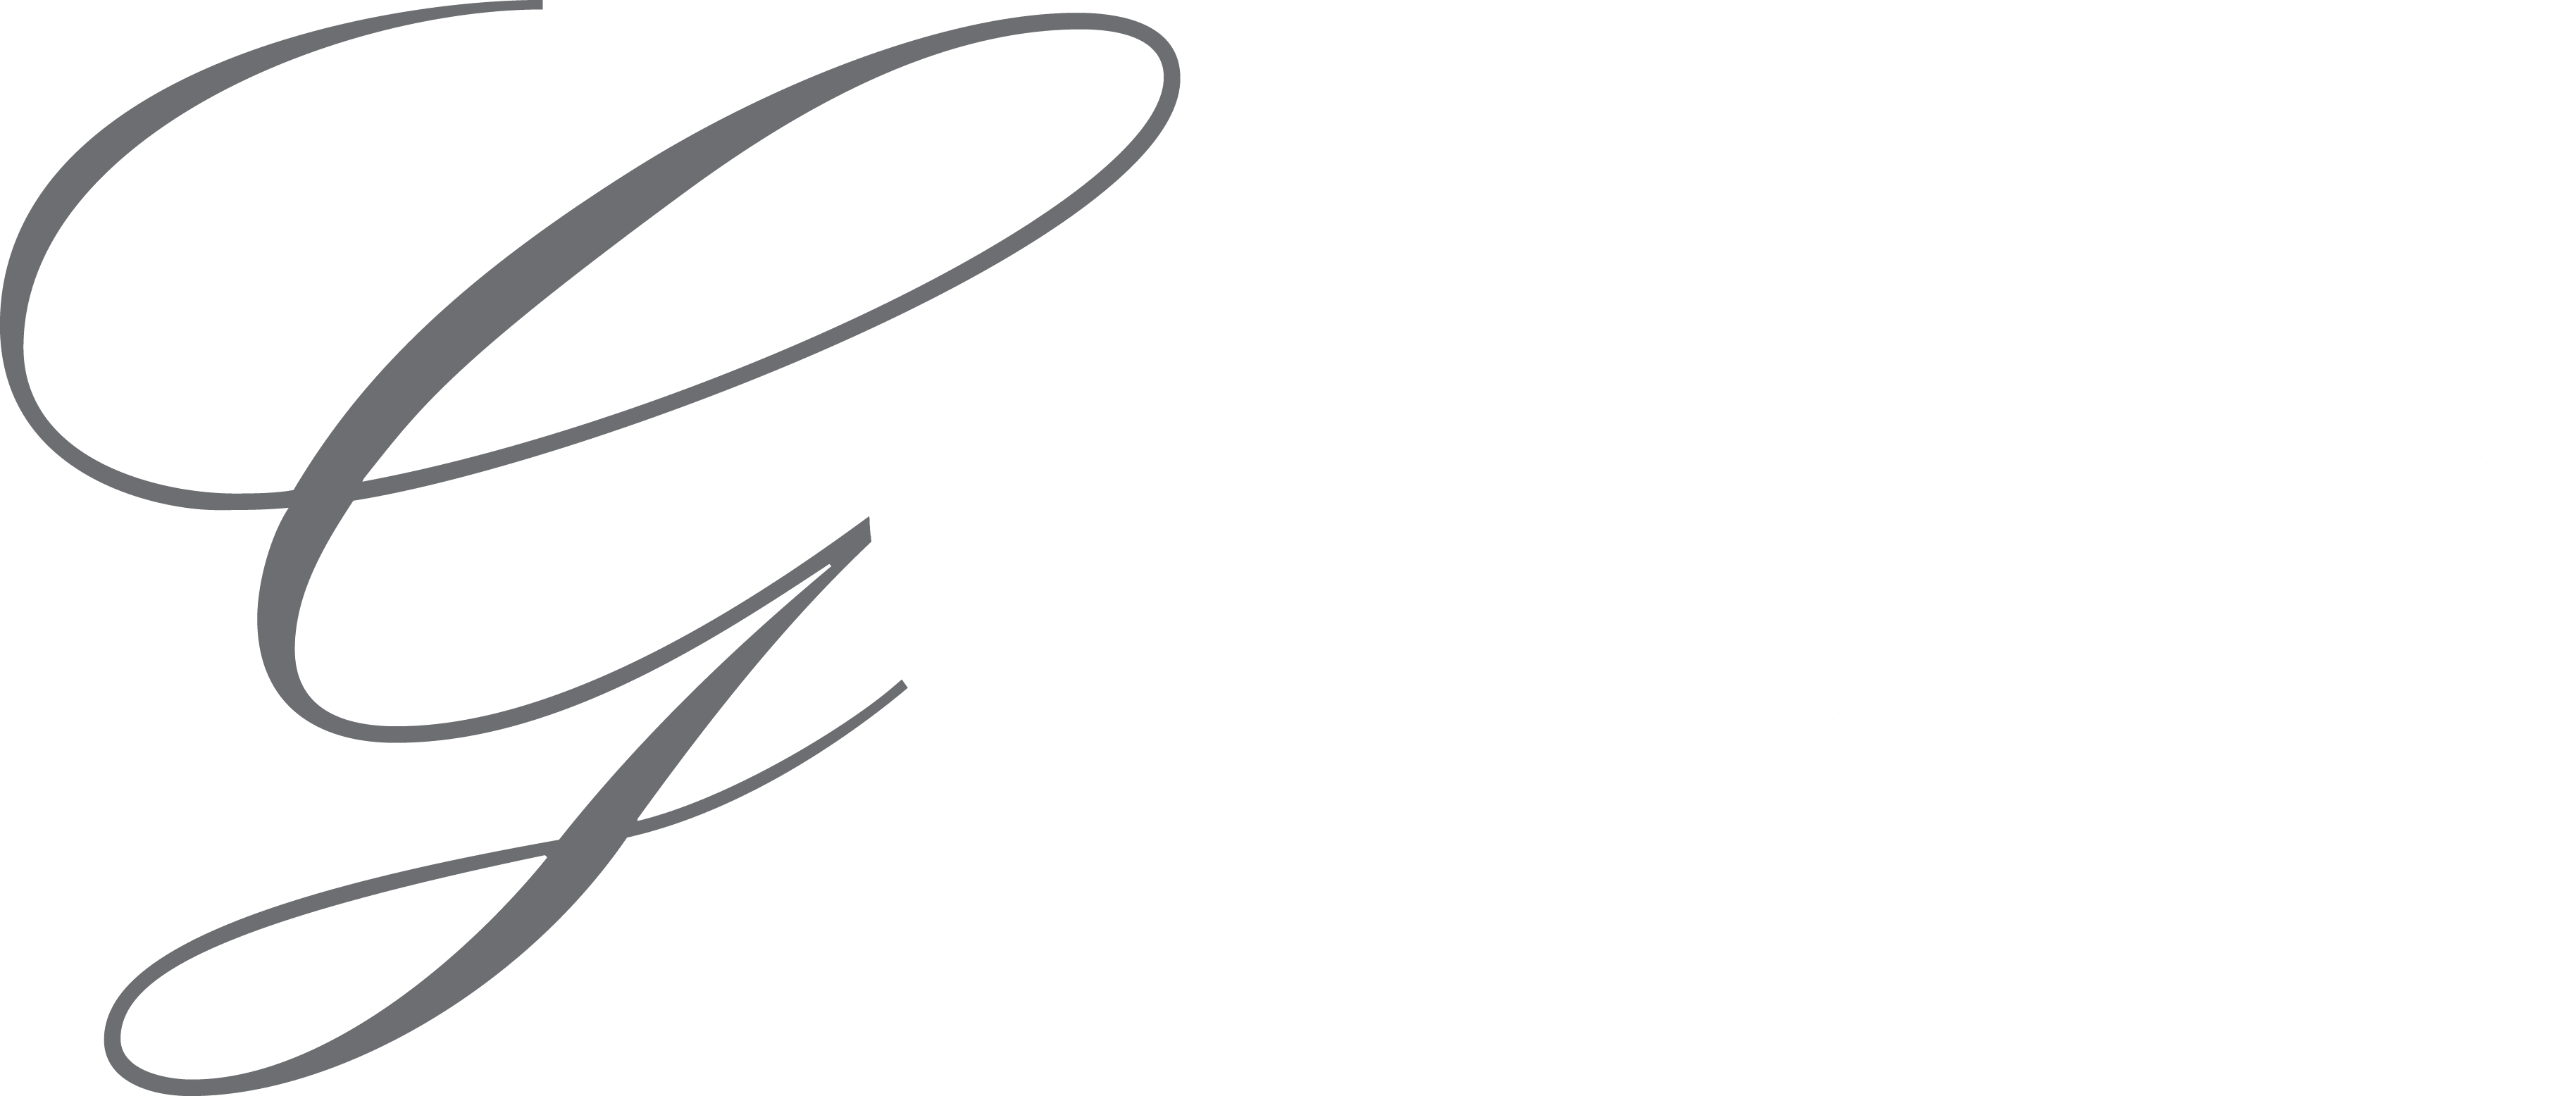 Real Estate Agency Gittoes - East Gosford